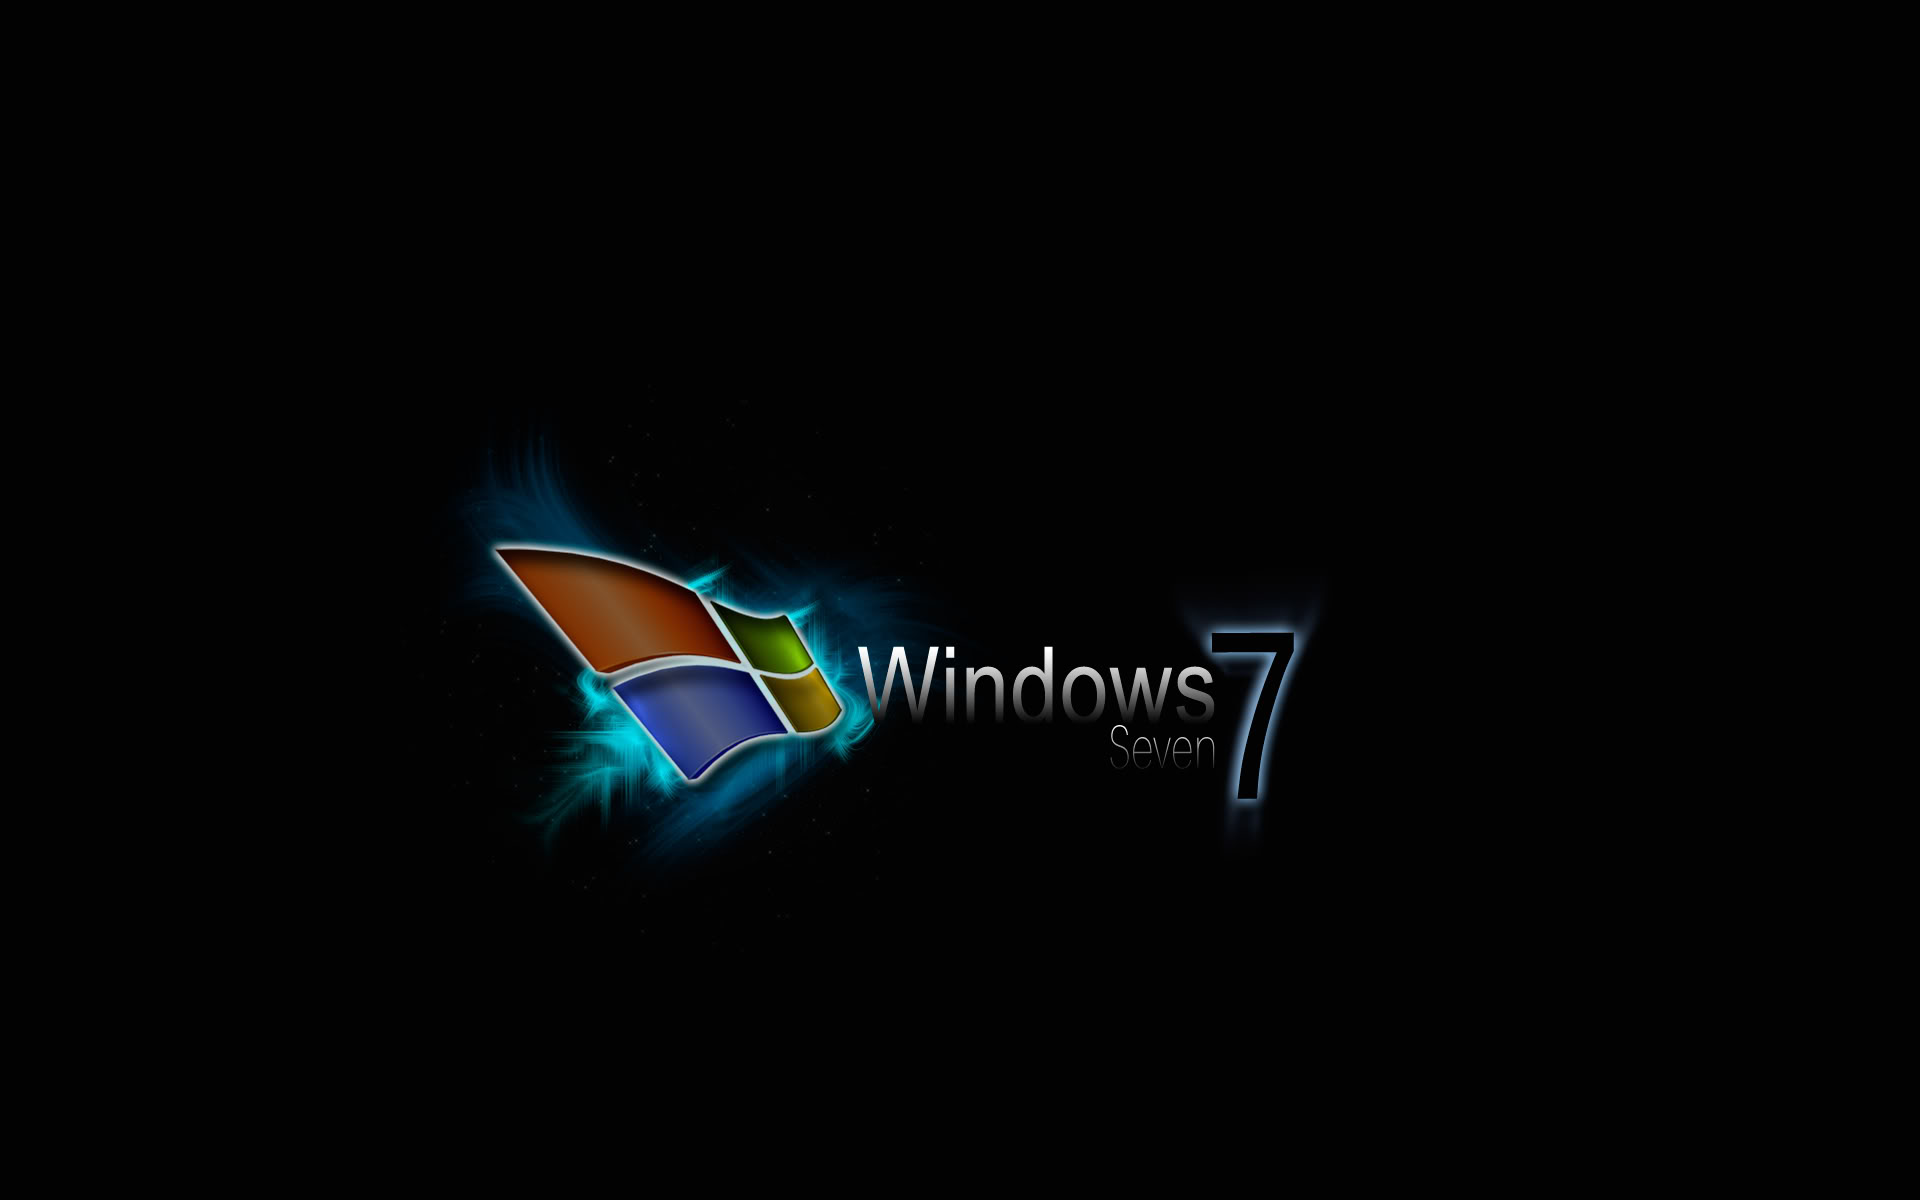 WINDOWS 7 COOL Wallpapers | Free Download Collections (33 High ...